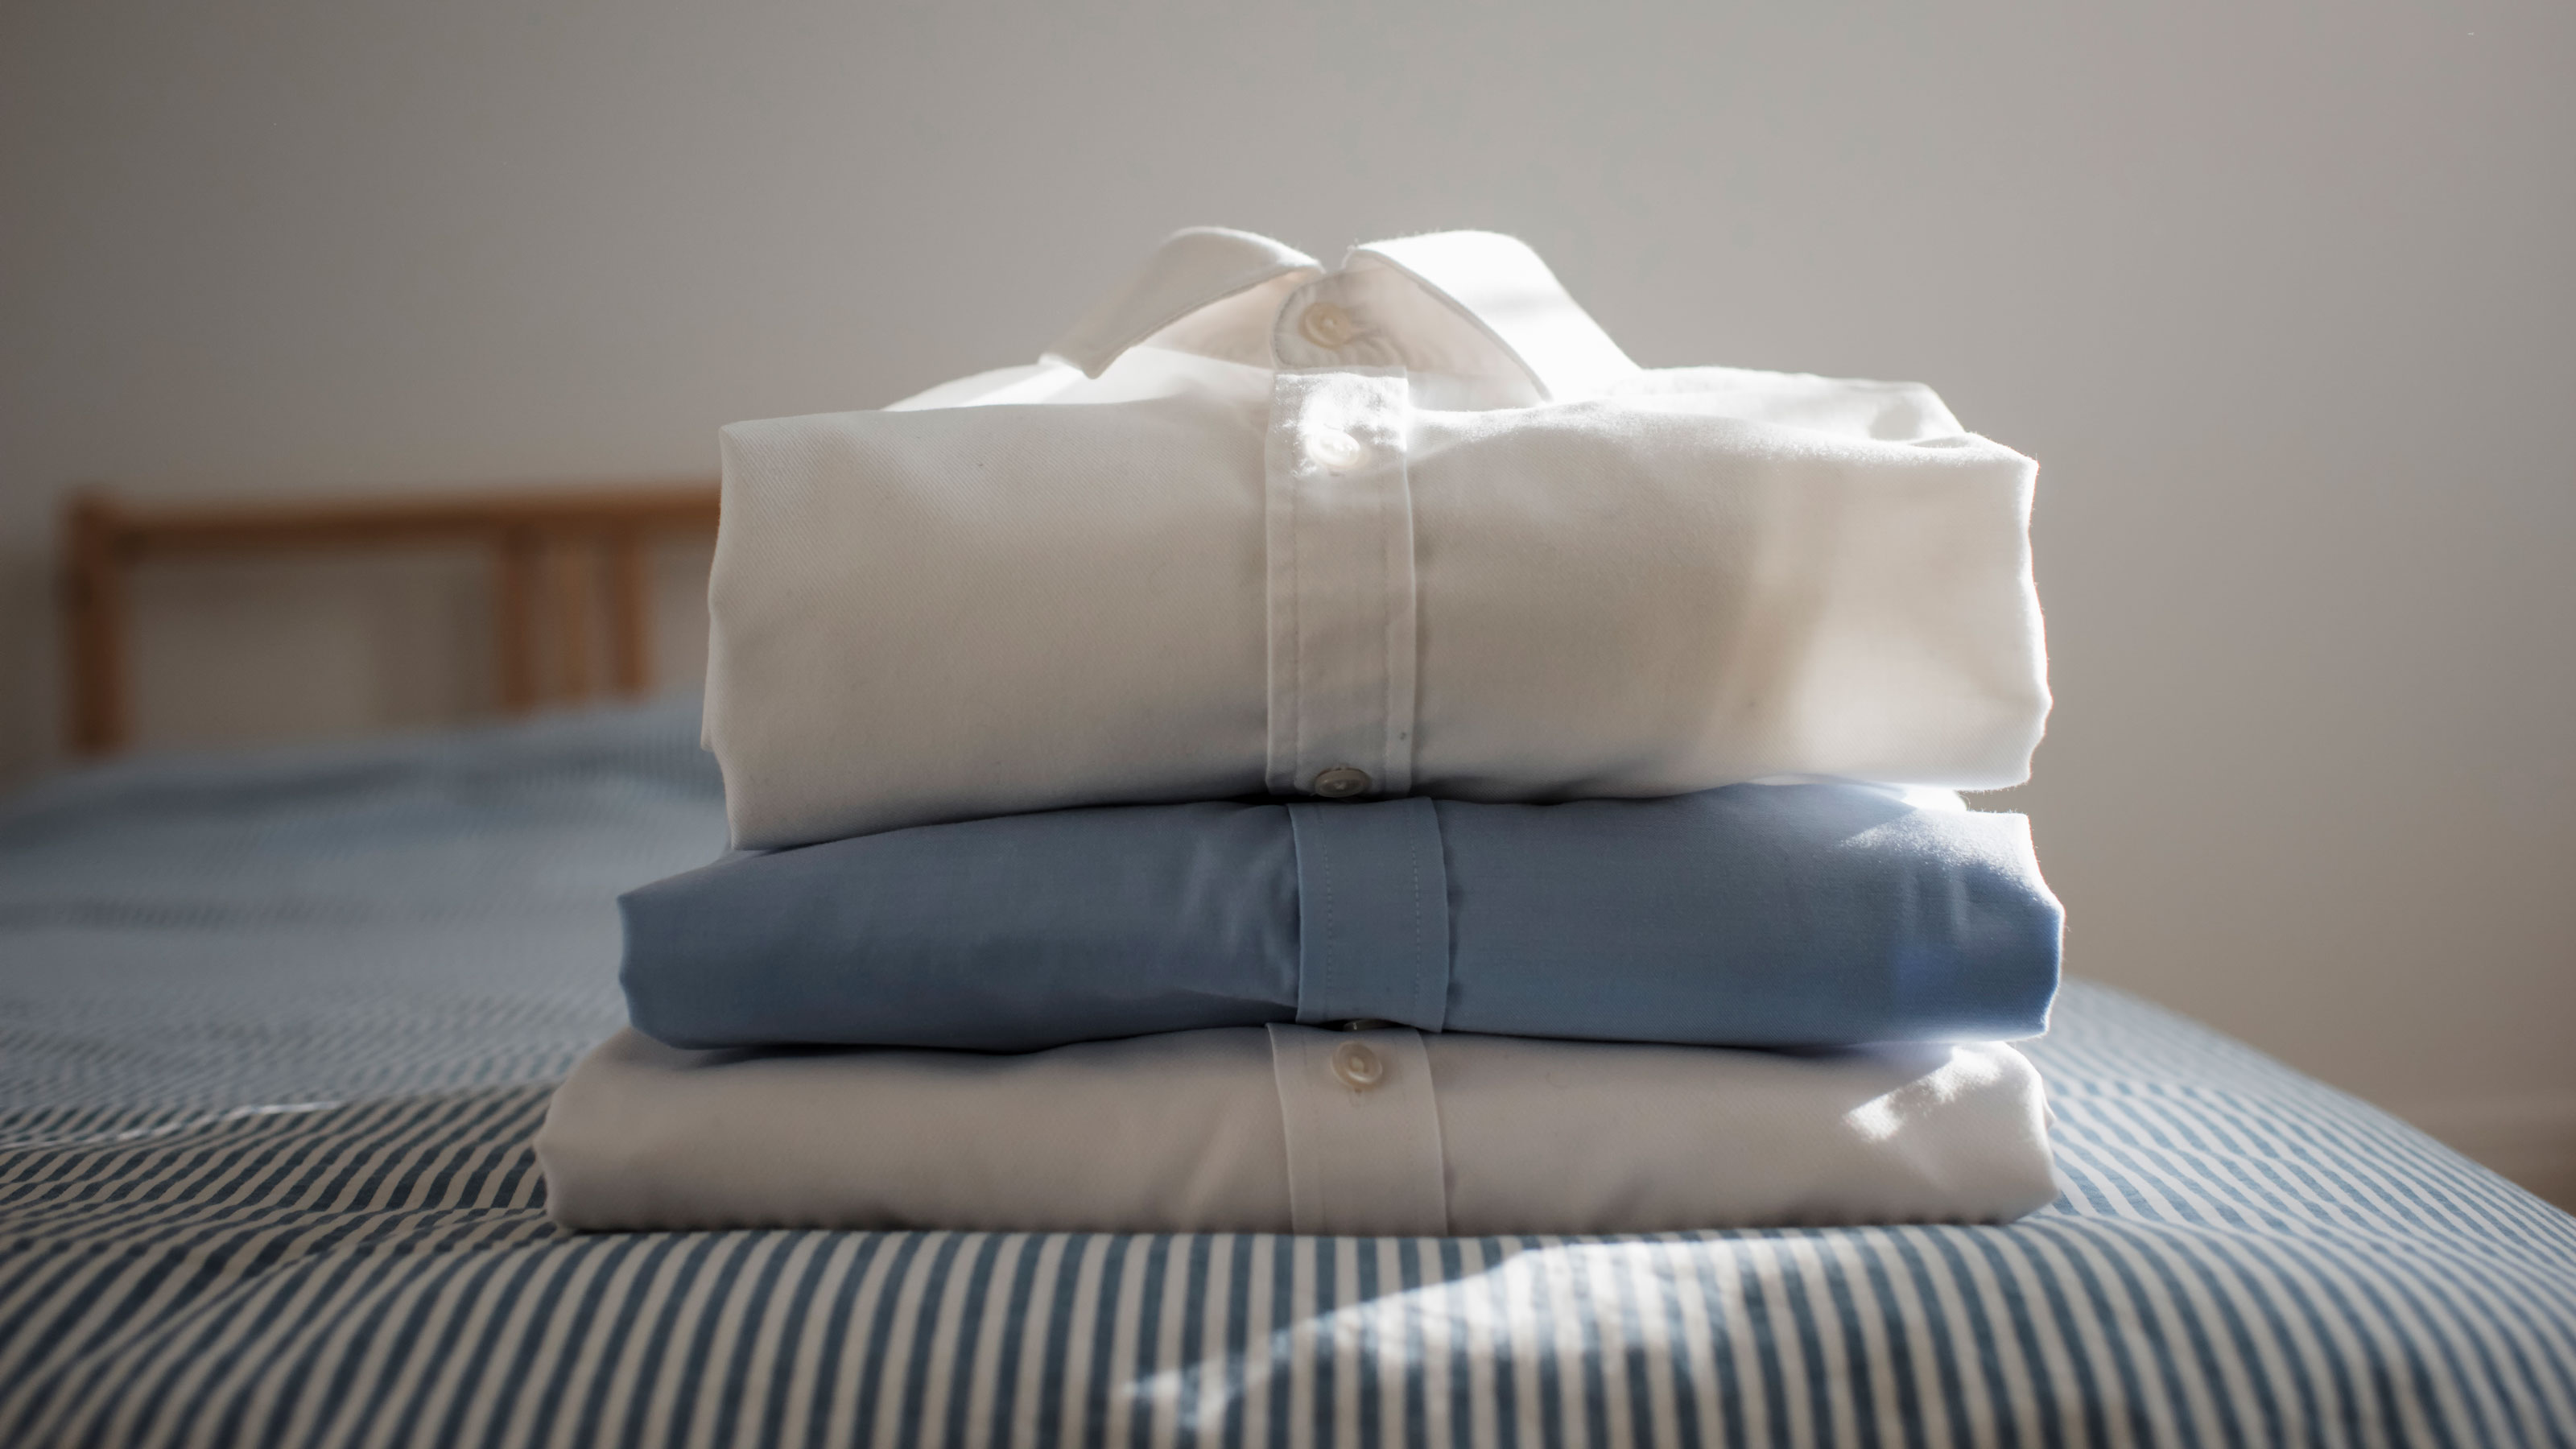 How to fold shirts – for stacking in the closet and packing in suitcases